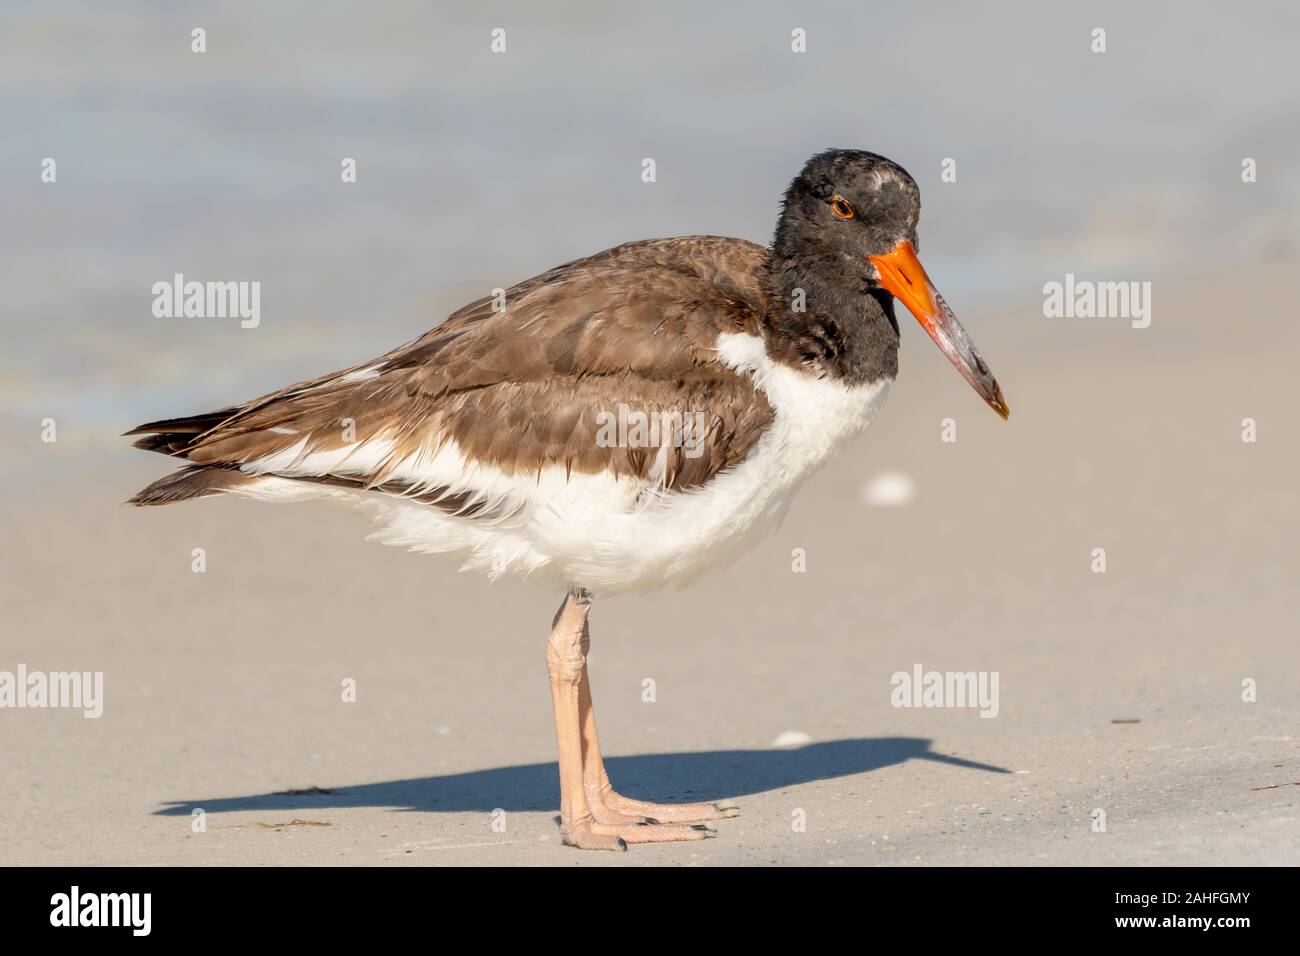 American oyster catcher stands on the beach Stock Photo